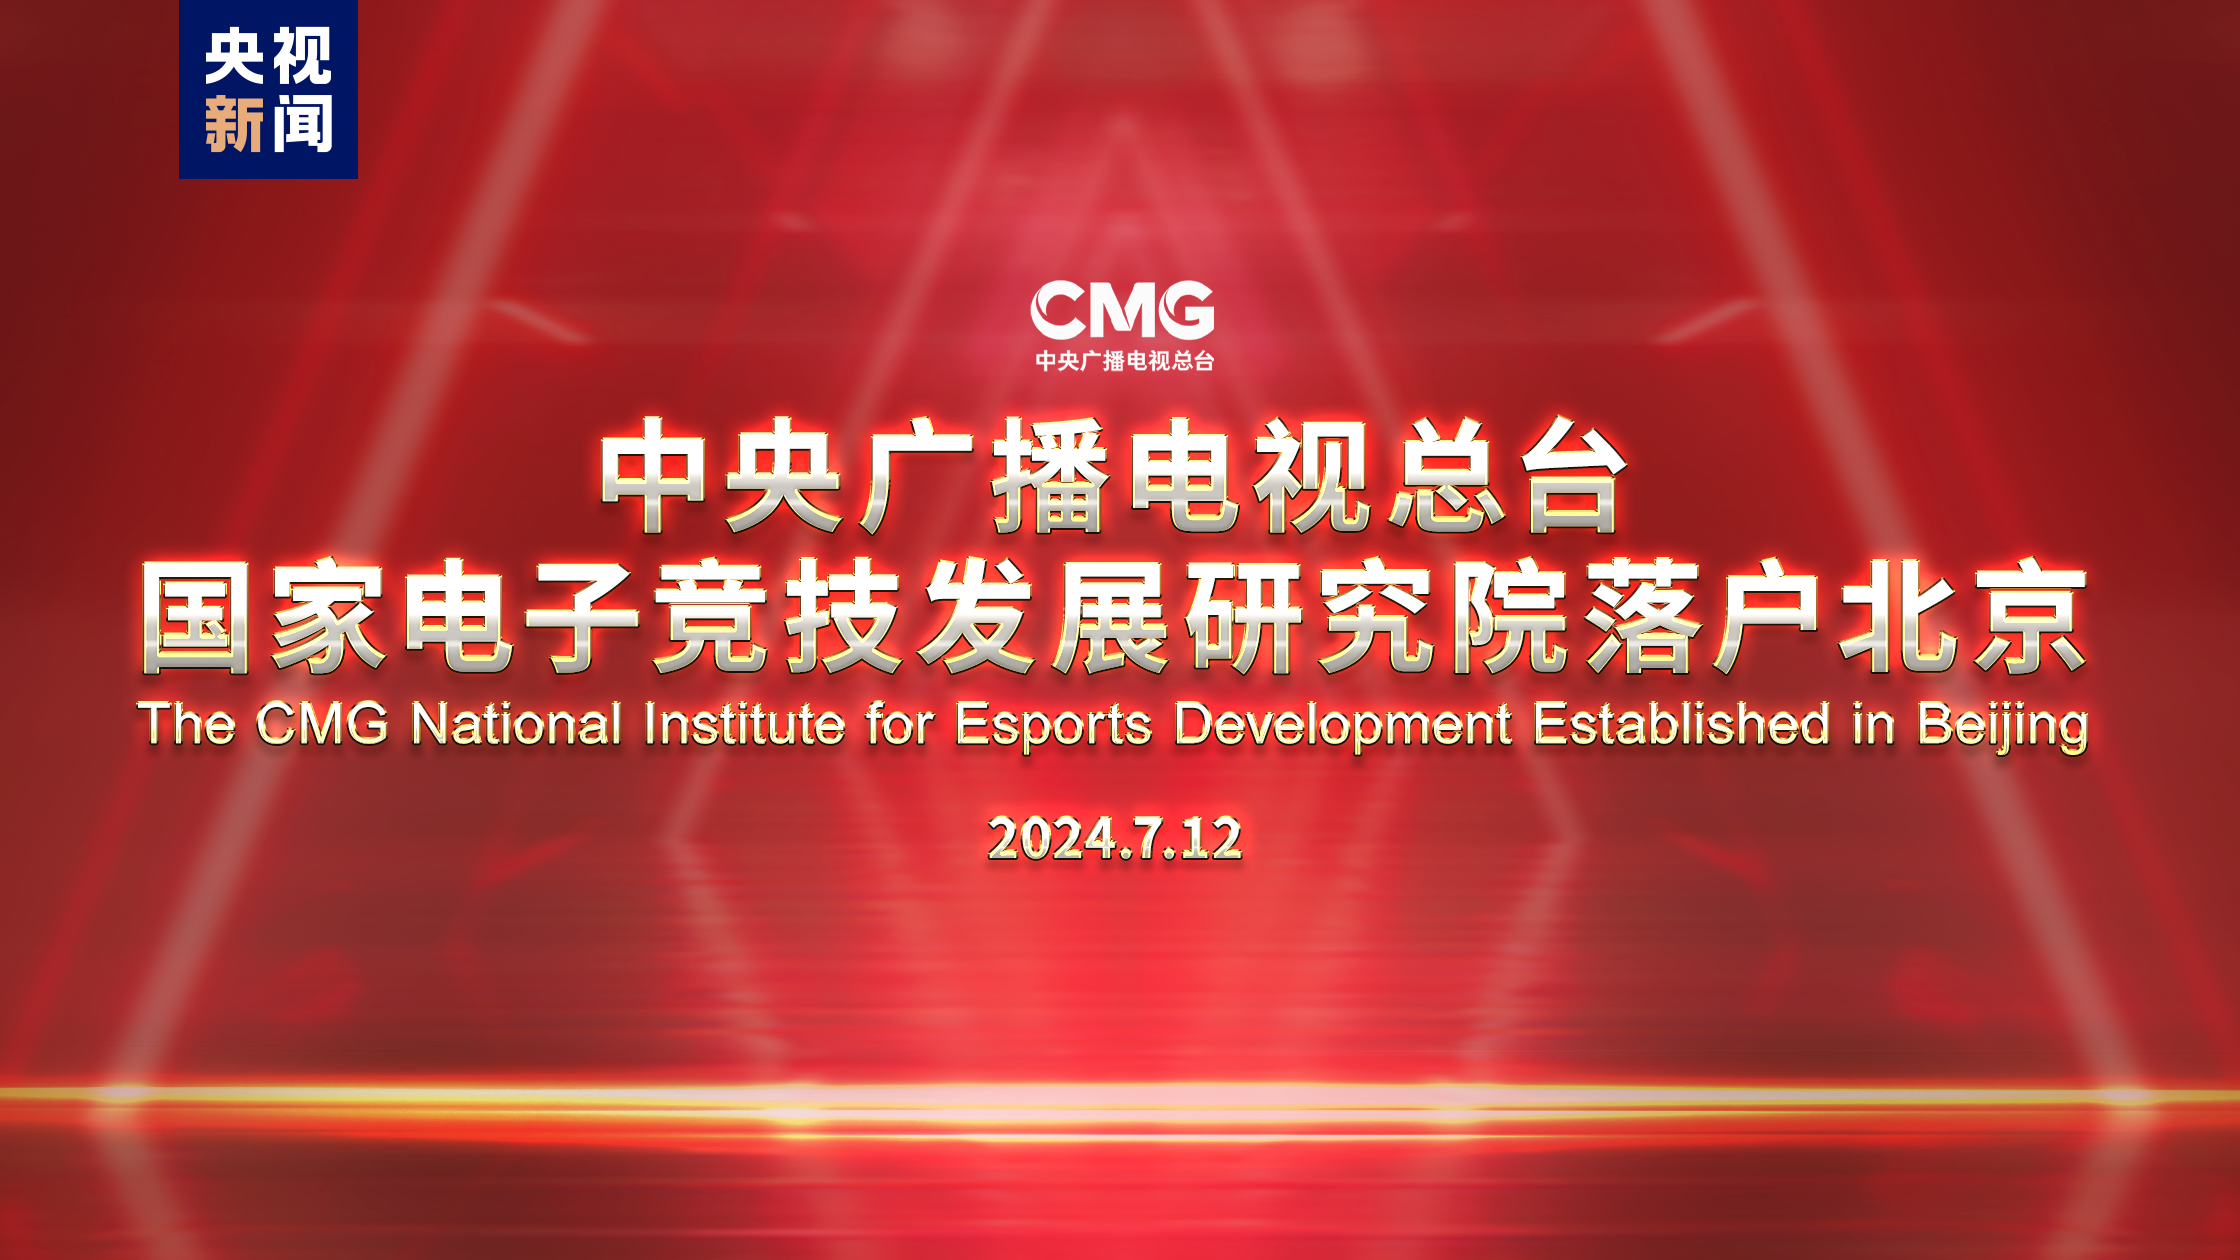 The China Media Group National Institute for Esports Development is established in Beijing, July 12, 2024. /CMG